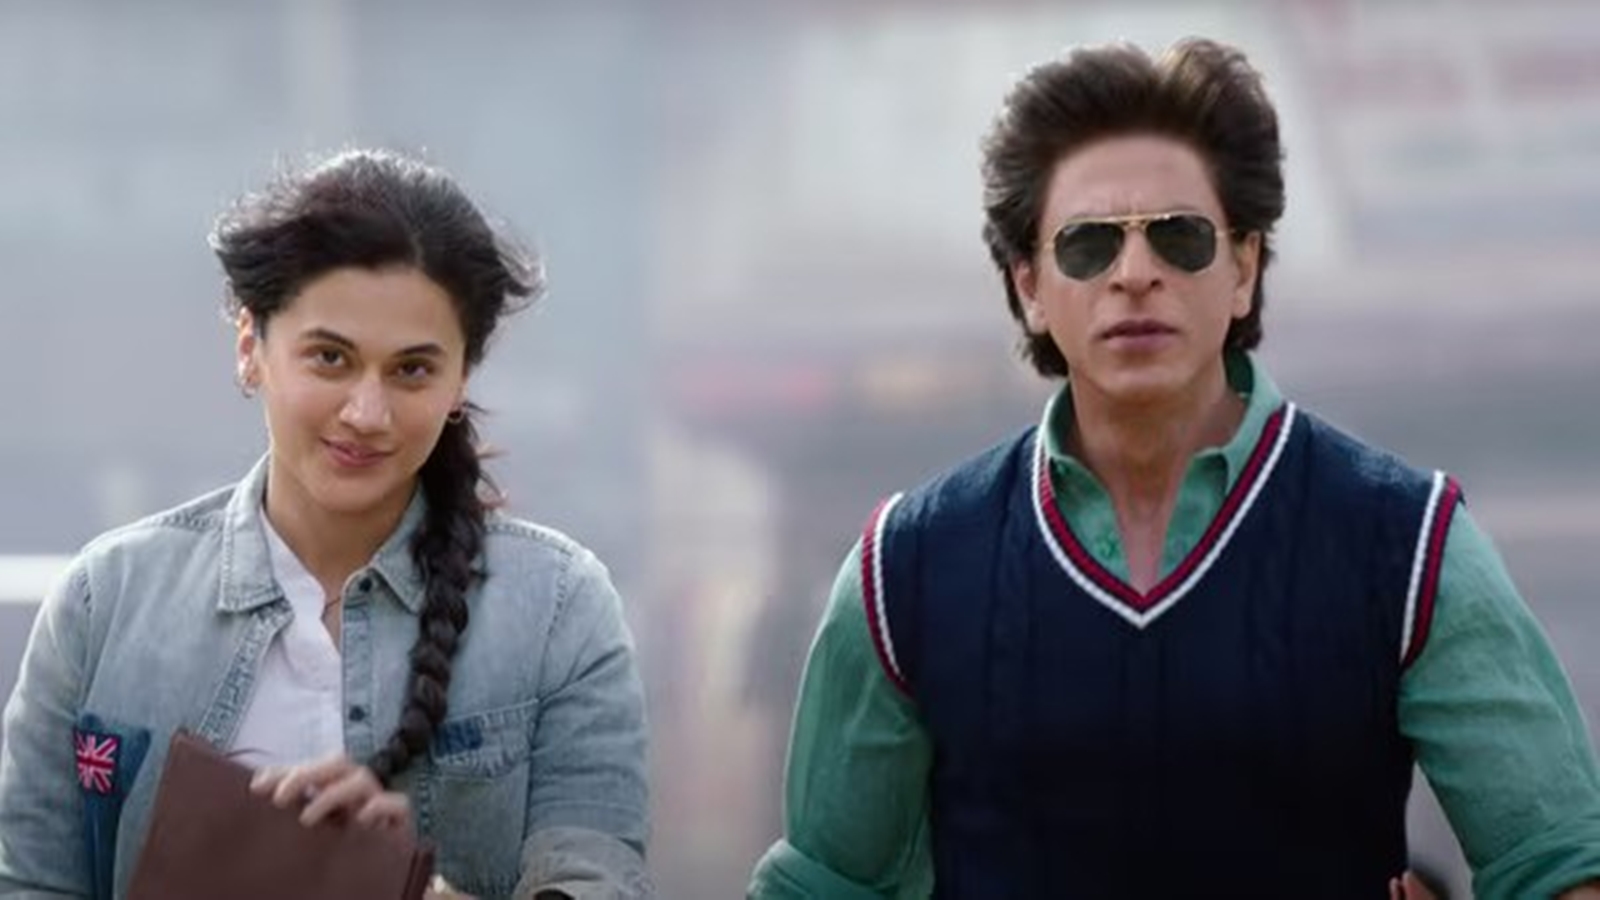 Taapsee Pannu says she was star-struck by Shah Rukh Khan, recalls he  rehearses every scene 50 times: 'I would just zone out mid take' |  Bollywood News - The Indian Express